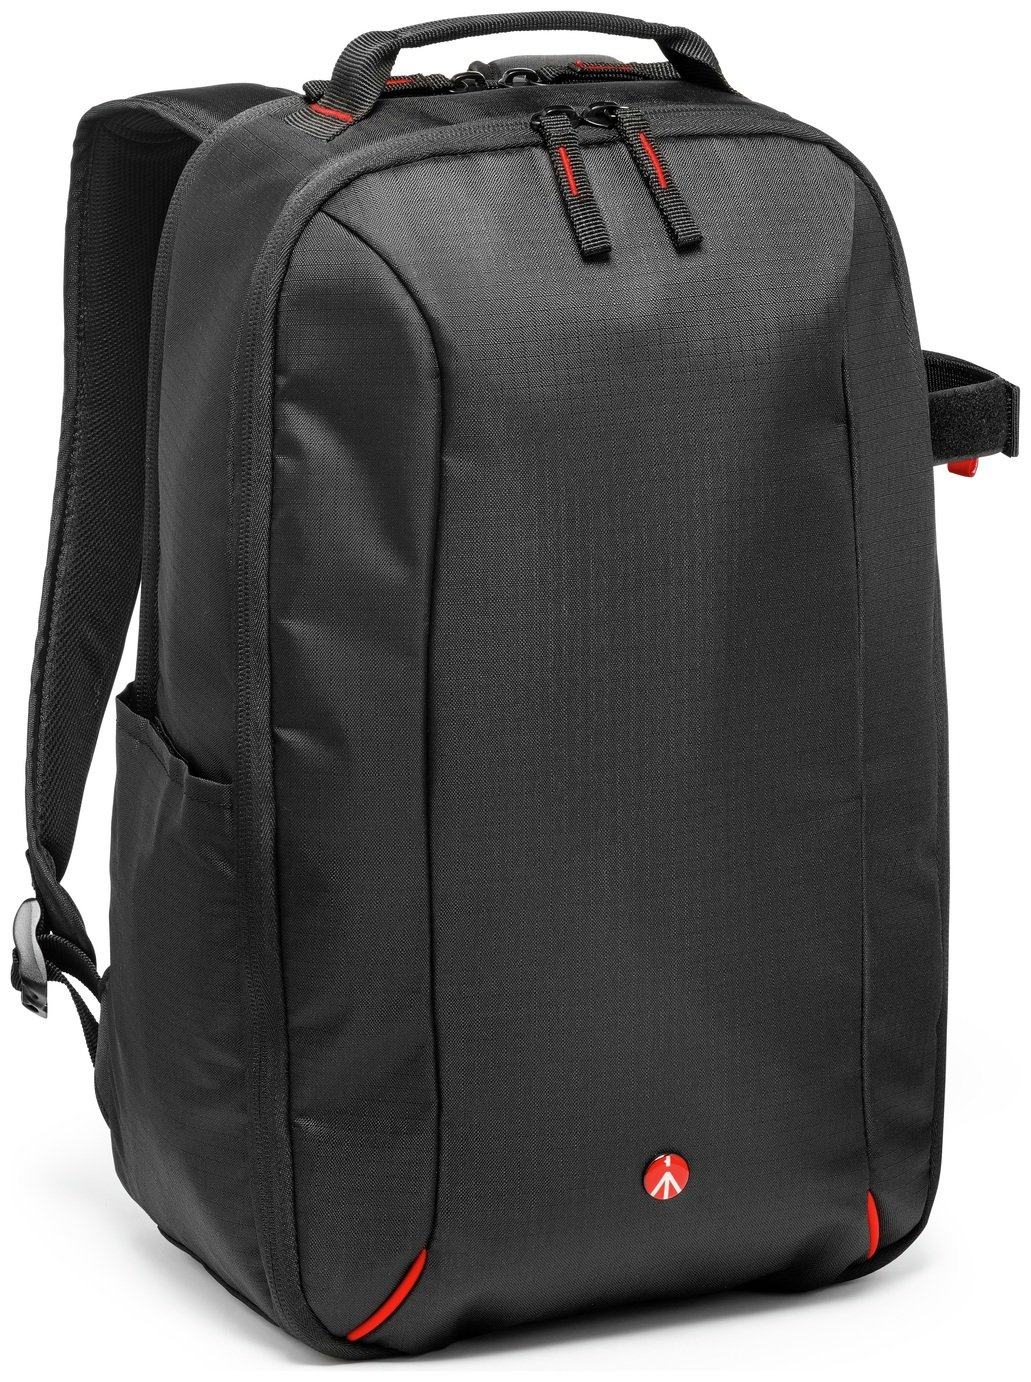 Manfrotto Essential DSLR Backpack review